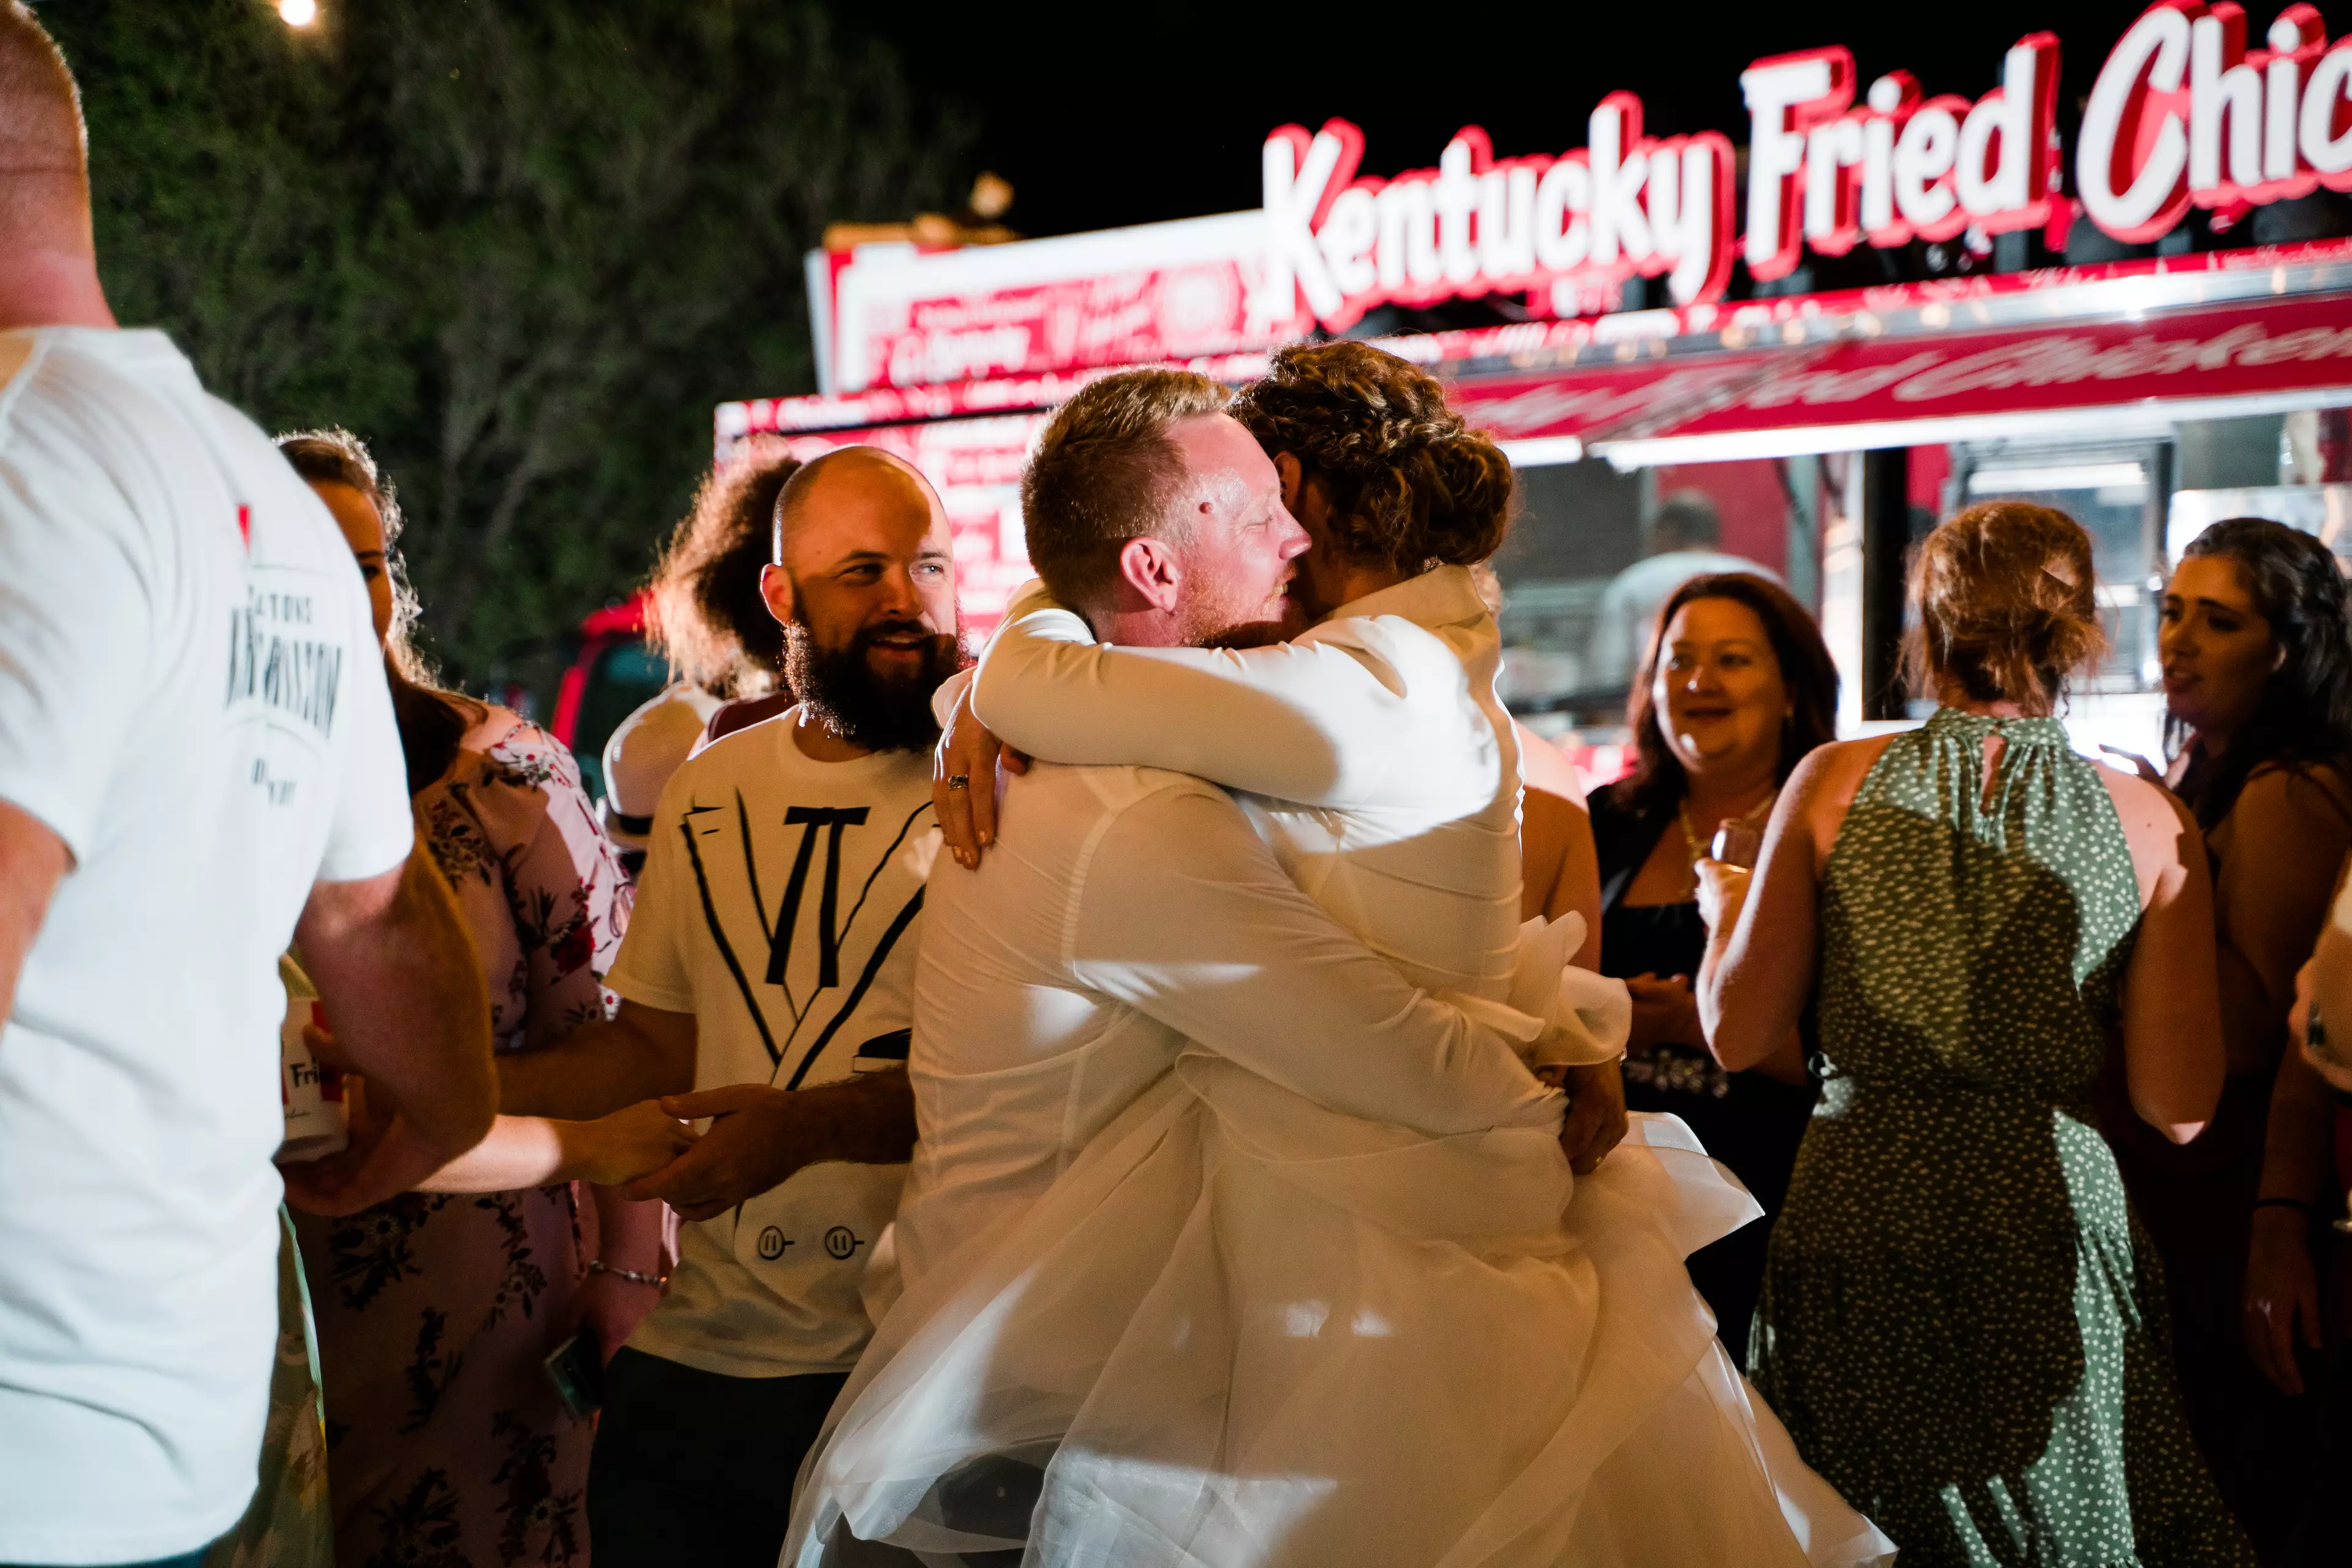 The couple, from Queensland, Australia, had their first date at KFC in 2017.